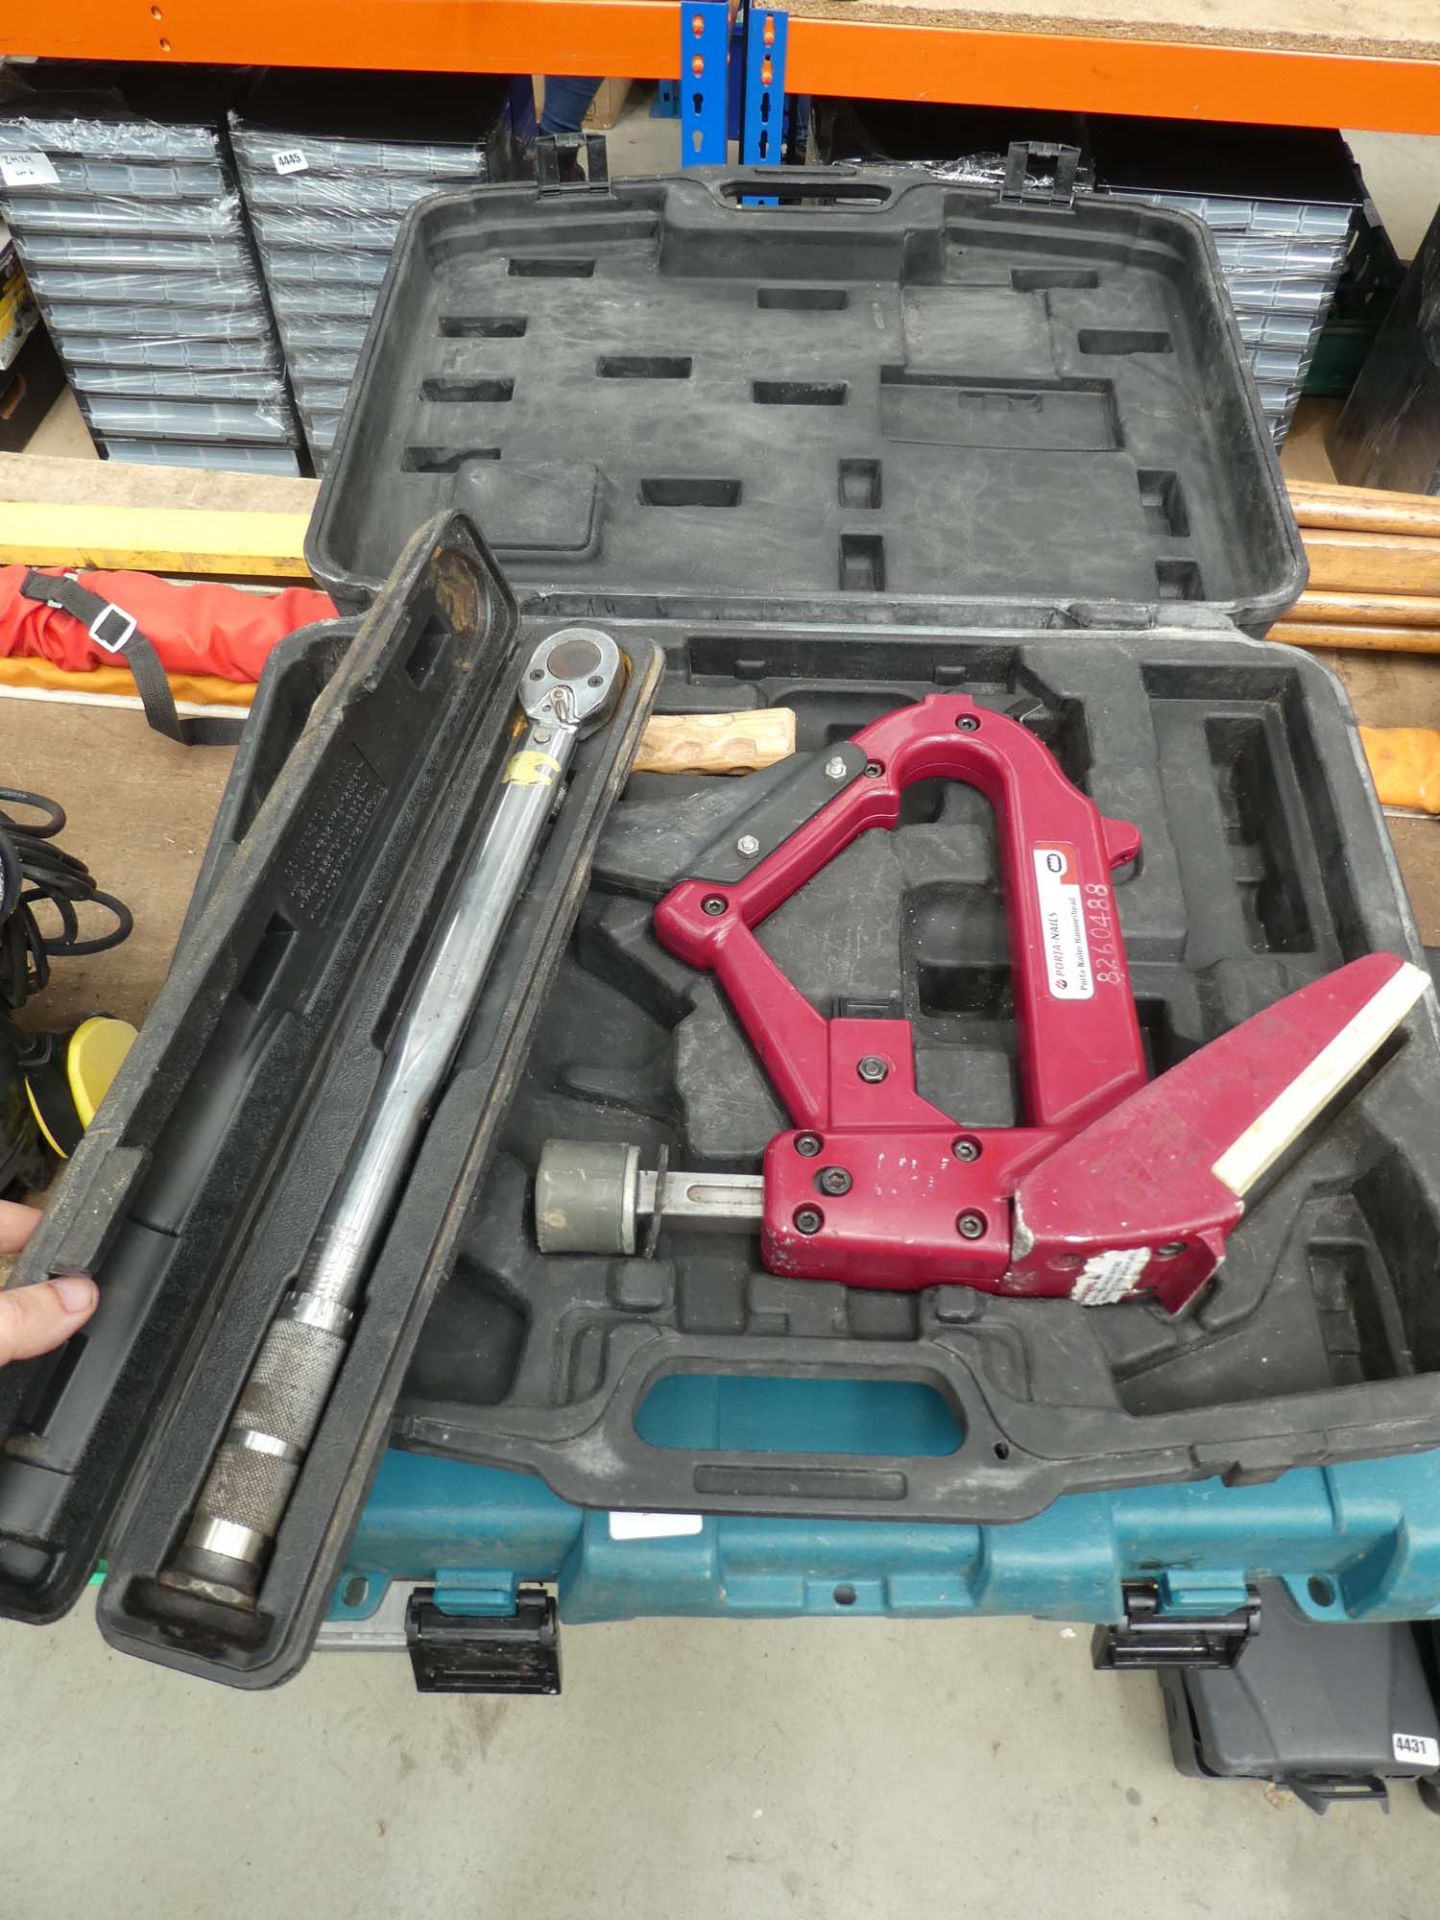 4447 Torque wrench, nailer and a toolbox